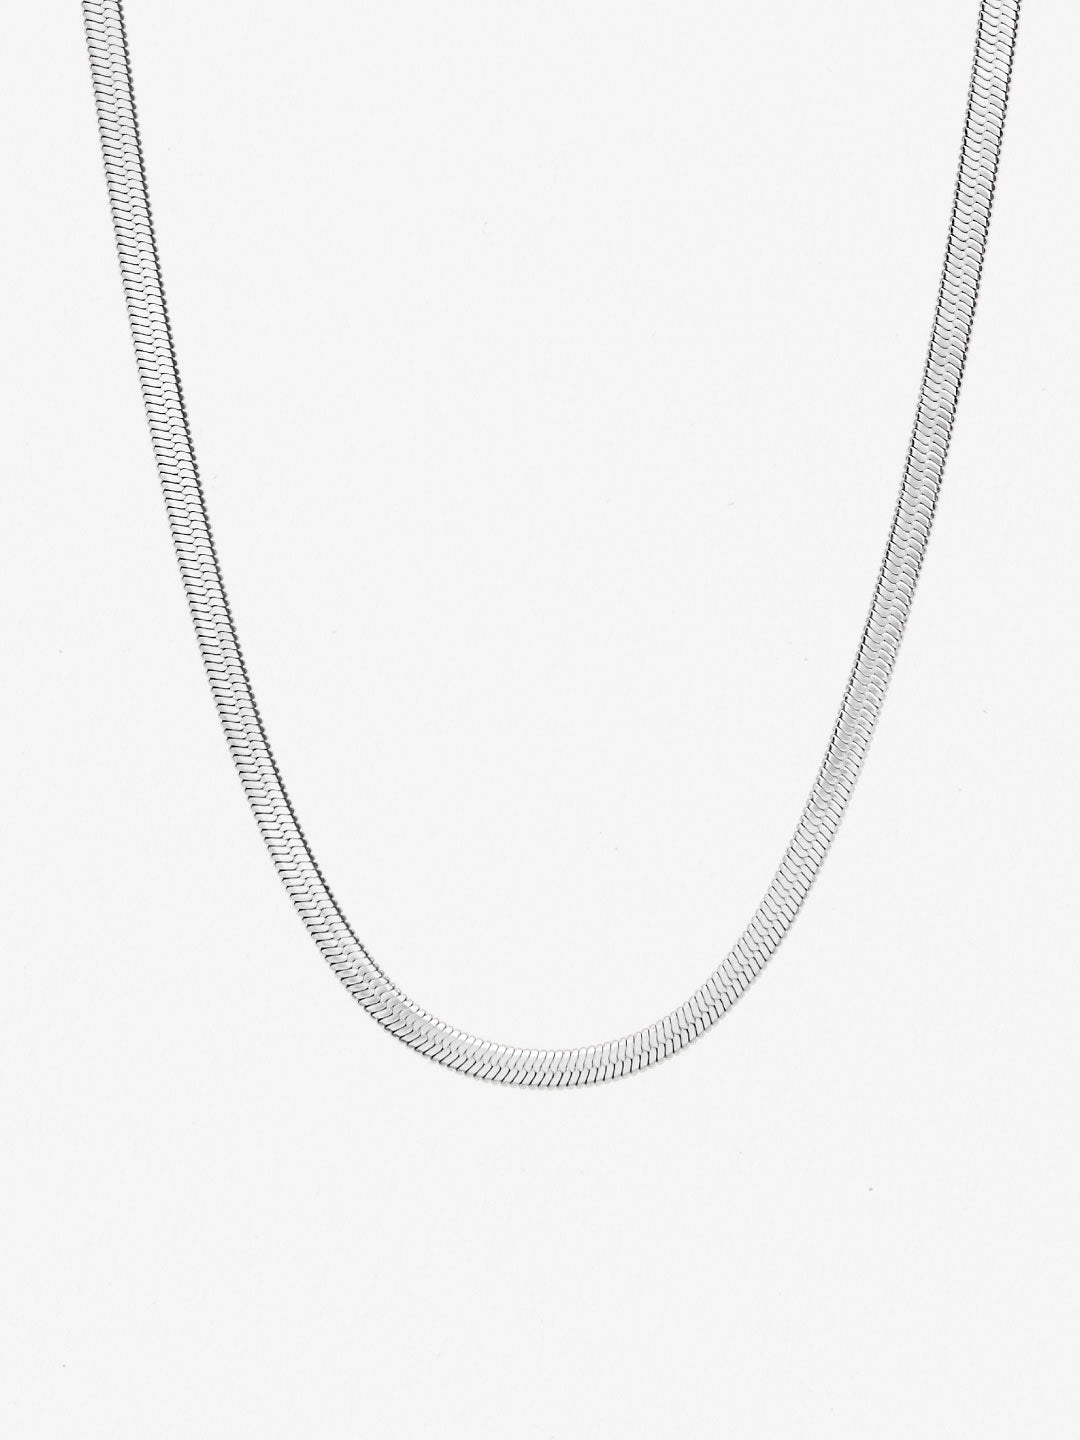 Ana Luisa Jewelry Necklaces Medium Chains Herringbone Chain Necklace Ina Silver Stainless Steel